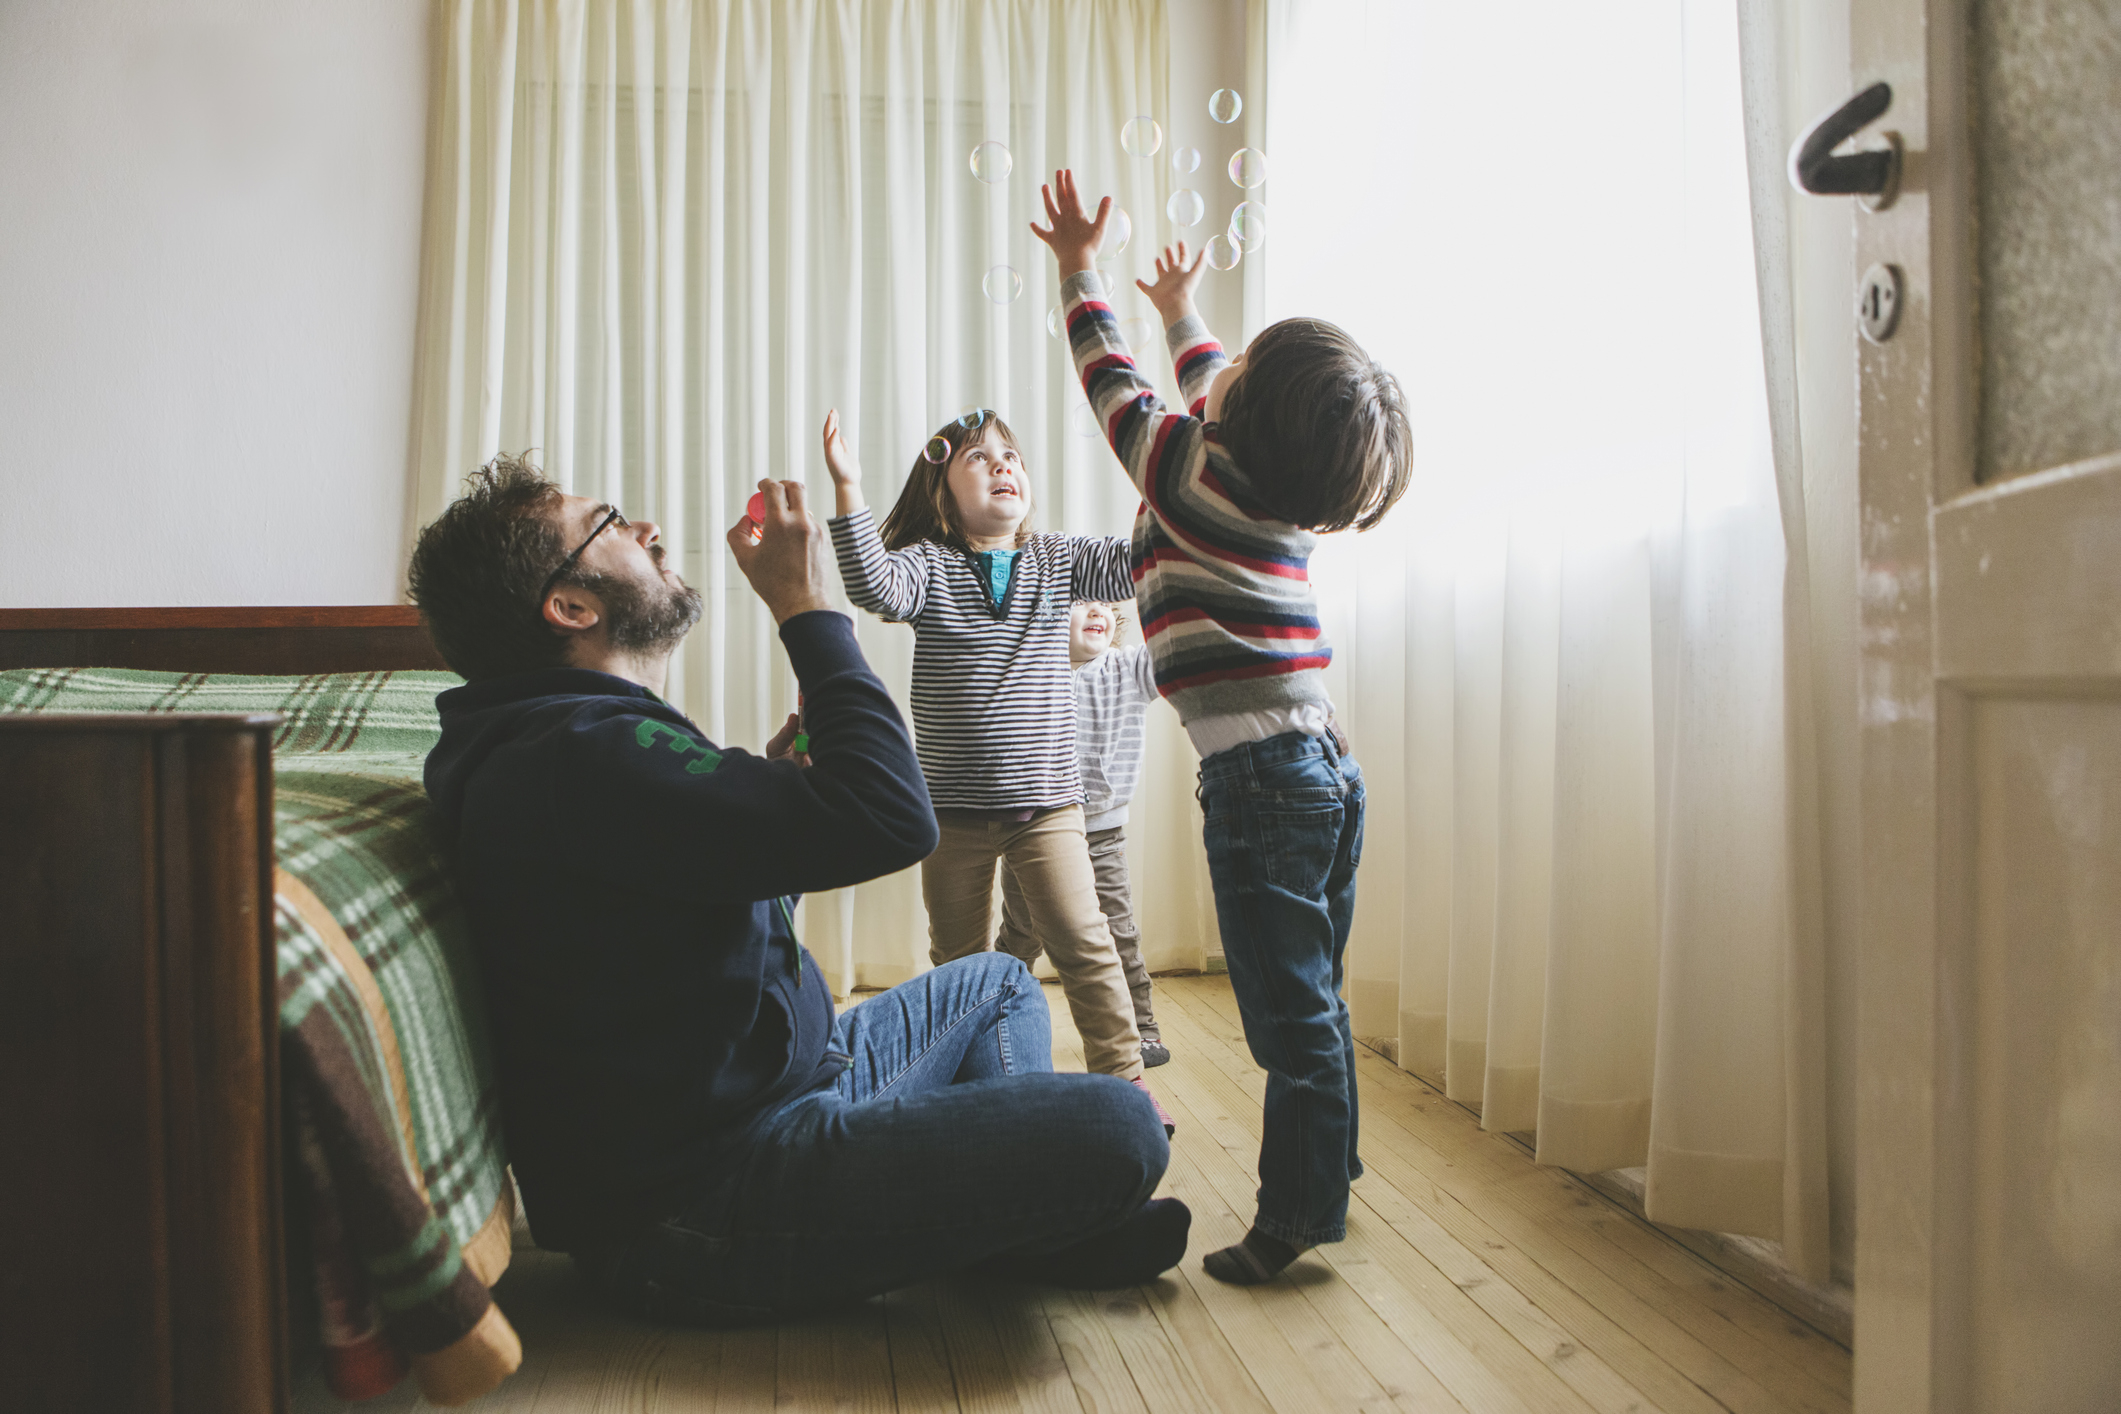 Man and two kids playfully toss coins in a cozy room, depicting a family enjoying a simple, budget-friendly activity